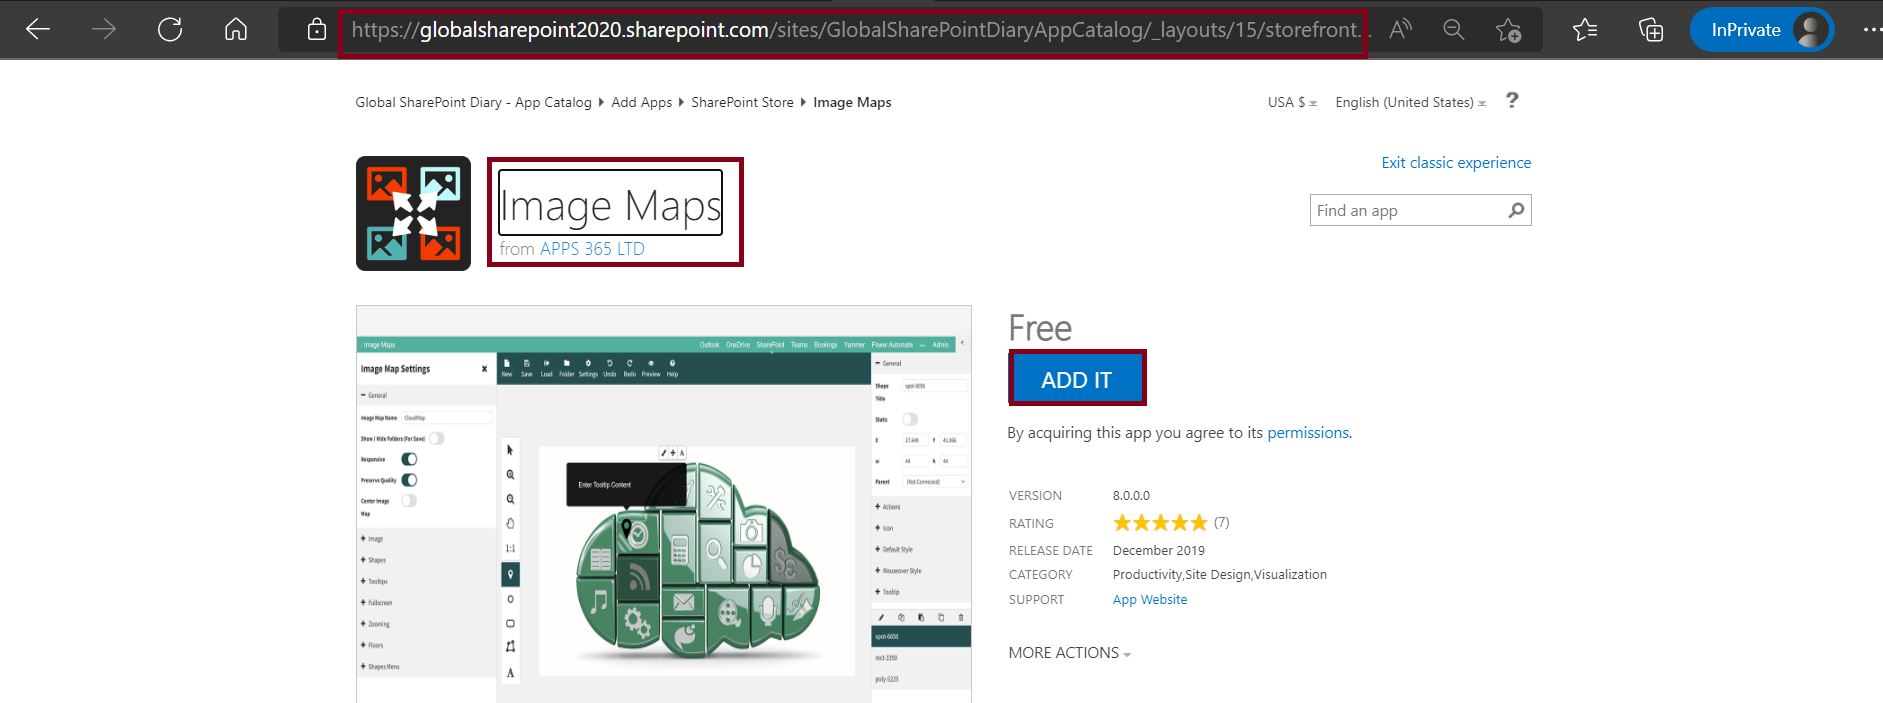 Add Images Map app in SharePoint Online from classic SharePoint store